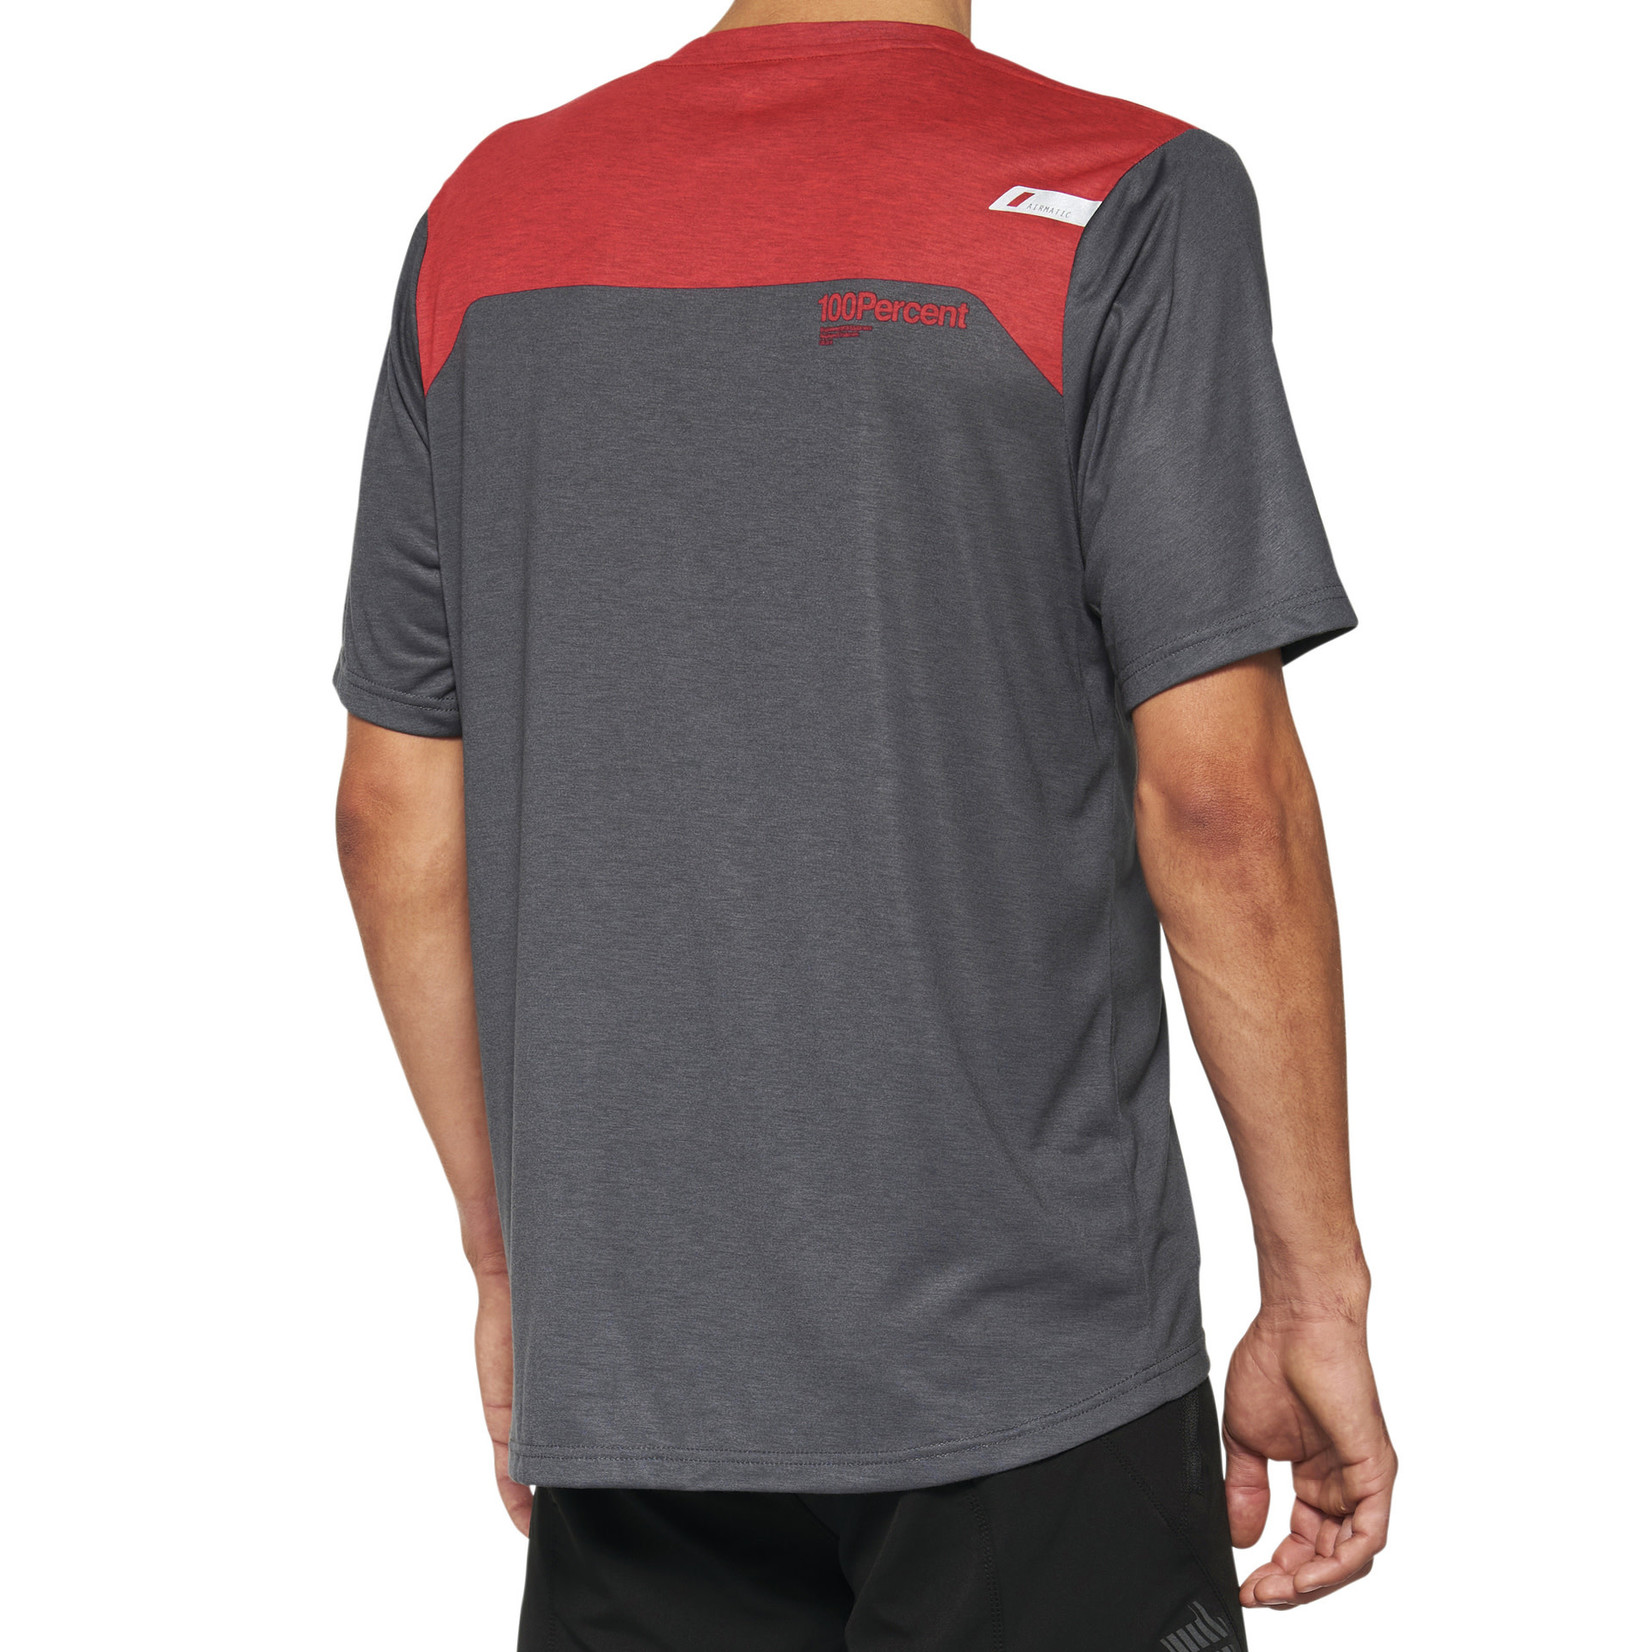 100 Percent 100% Airmatic Short Sleeve Jersey - Charcoal/Racer Red